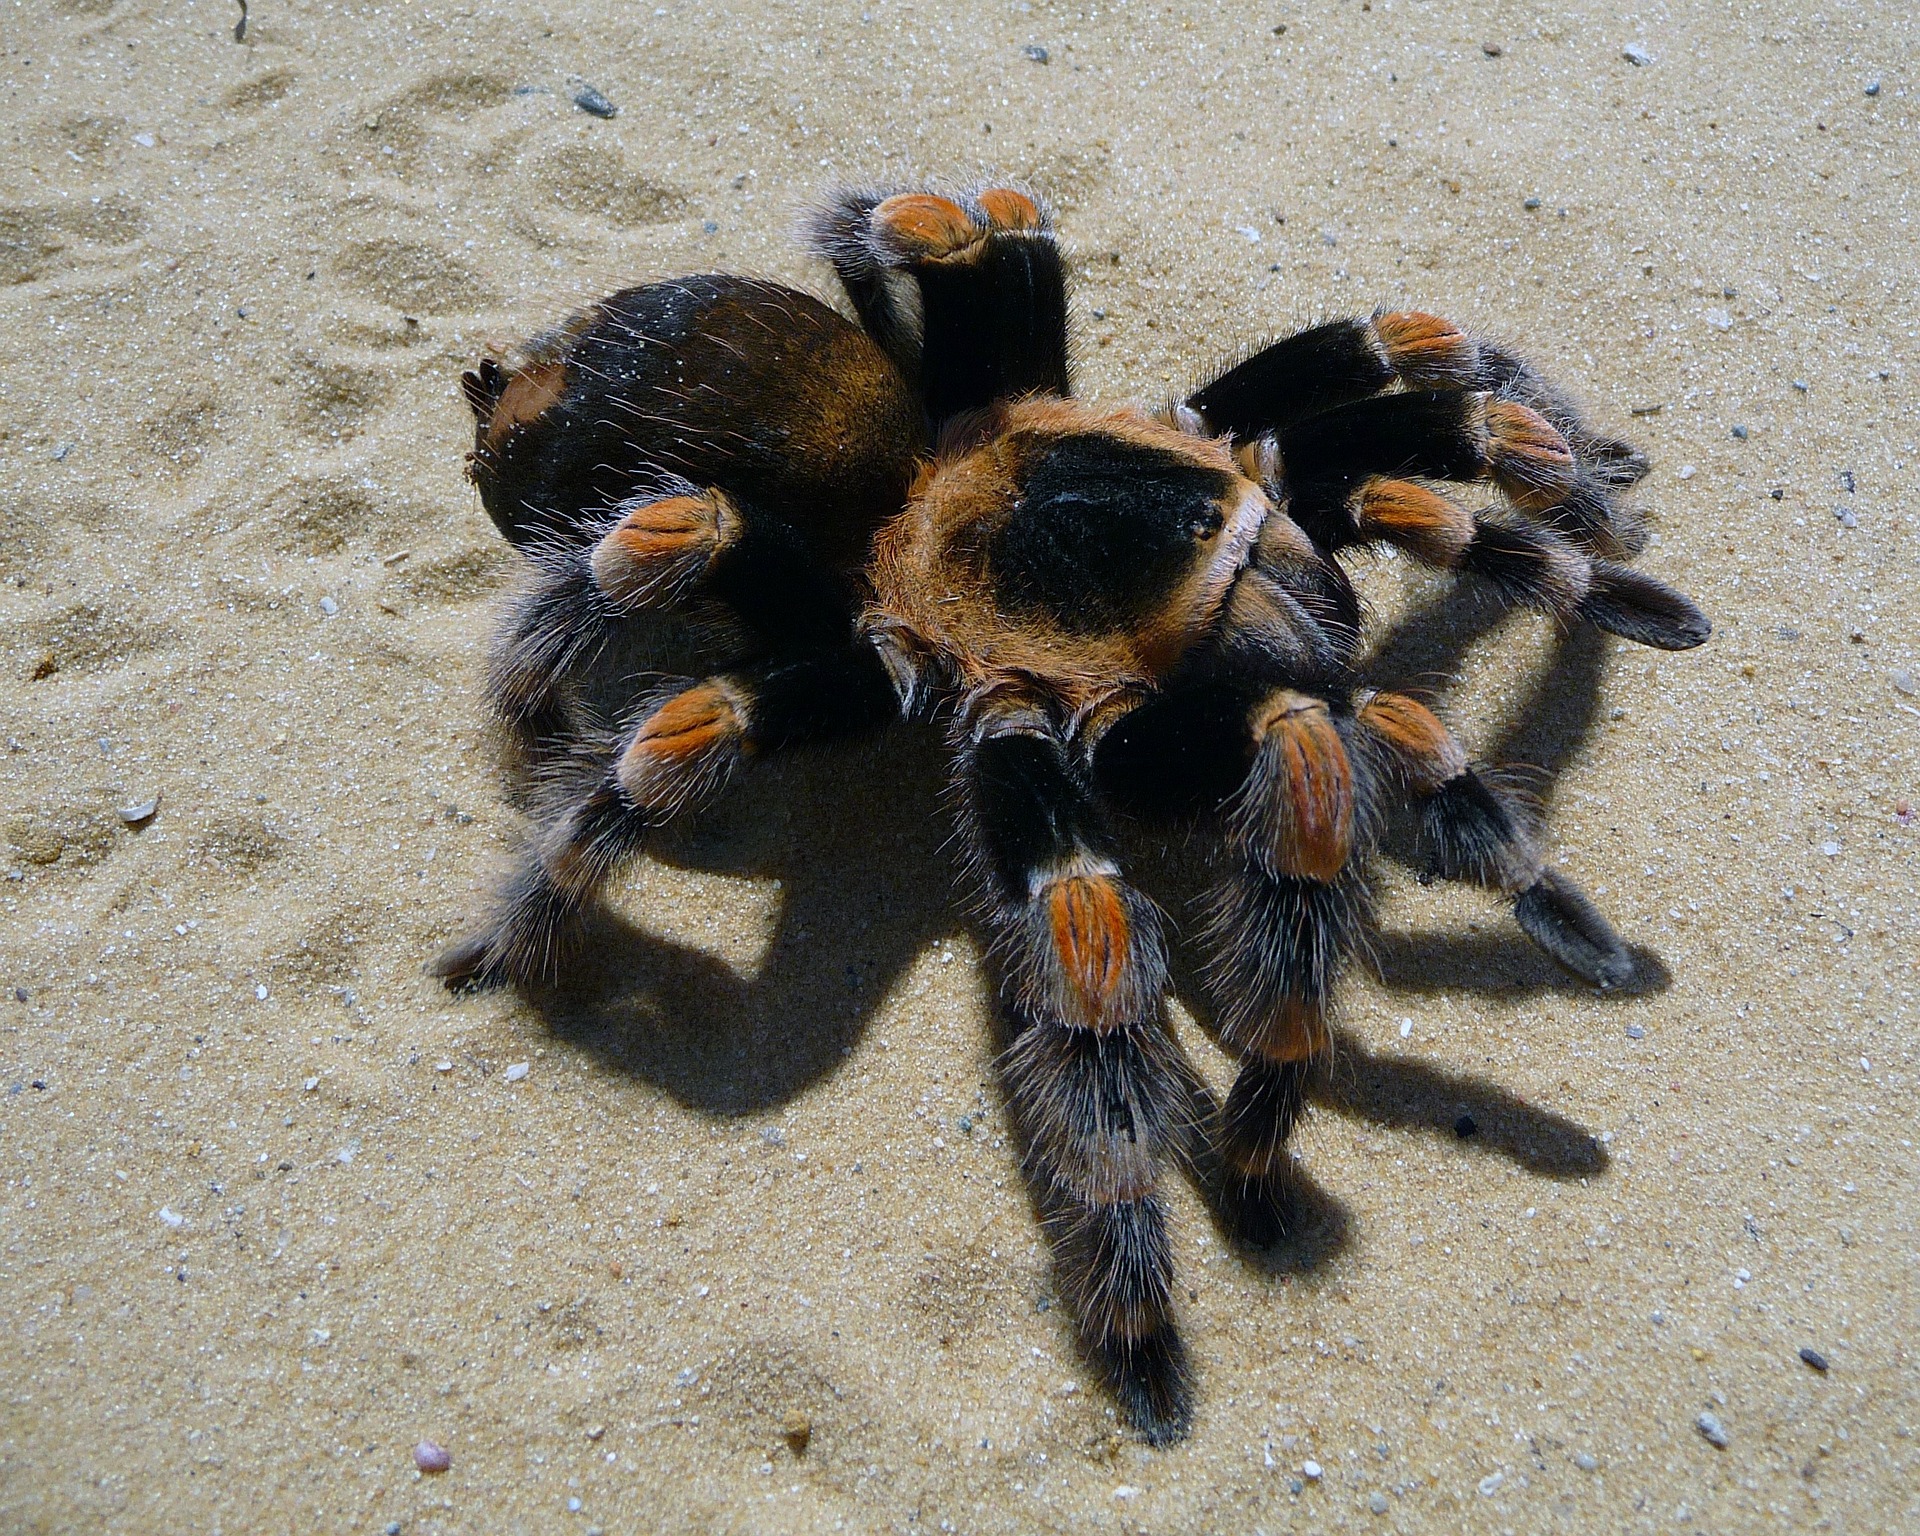 Spider on the sand photo